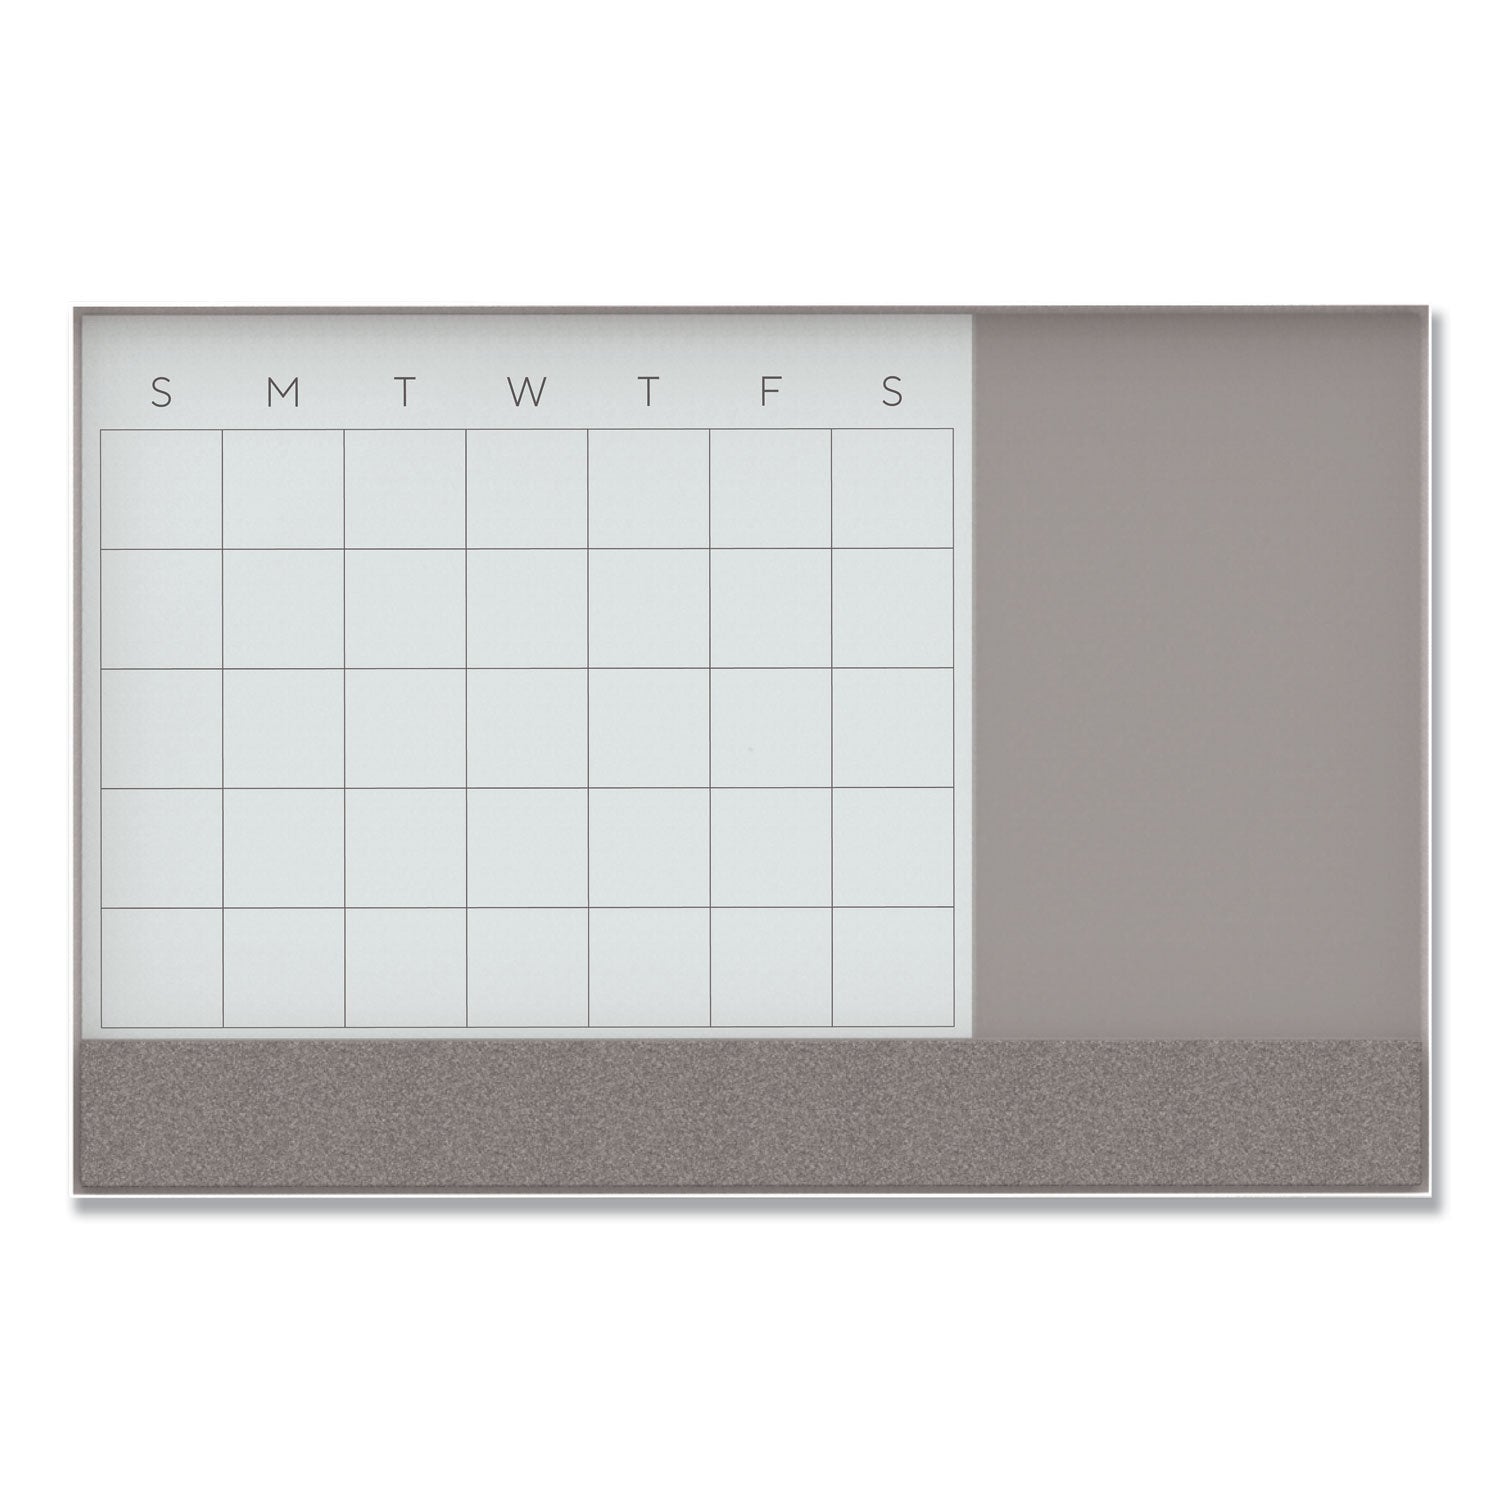 3n1-magnetic-glass-dry-erase-combo-board-47-x-35-month-view-gray-white-surface-white-aluminum-frame_ubr3198u0001 - 1